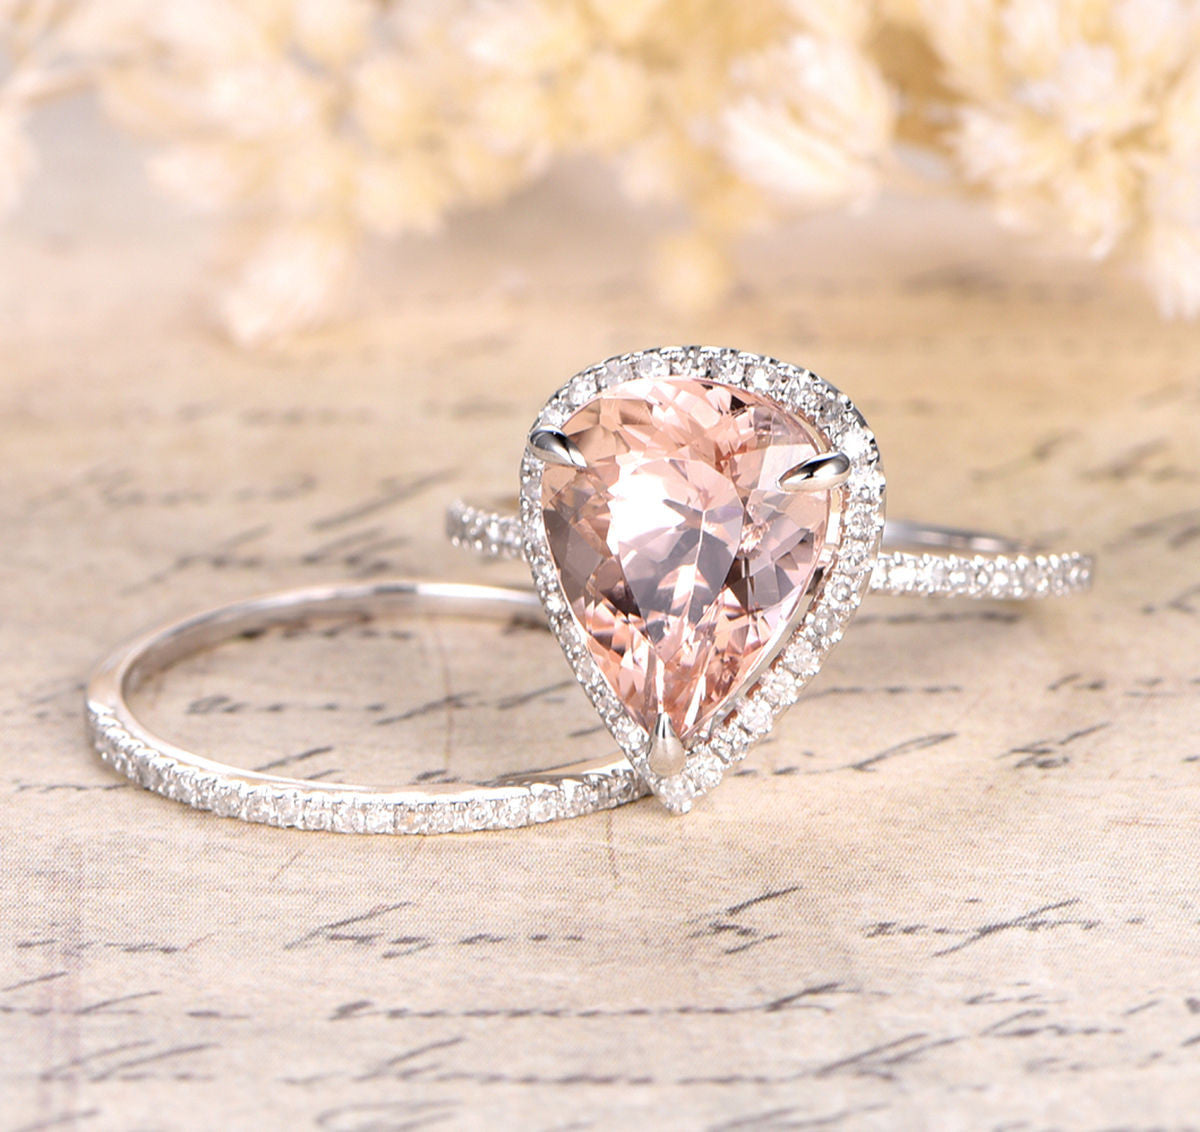 Pear Morganite Engagement Ring Sets Pave Diamond Wedding 14K White Gold 10x12mm - Lord of Gem Rings - 3